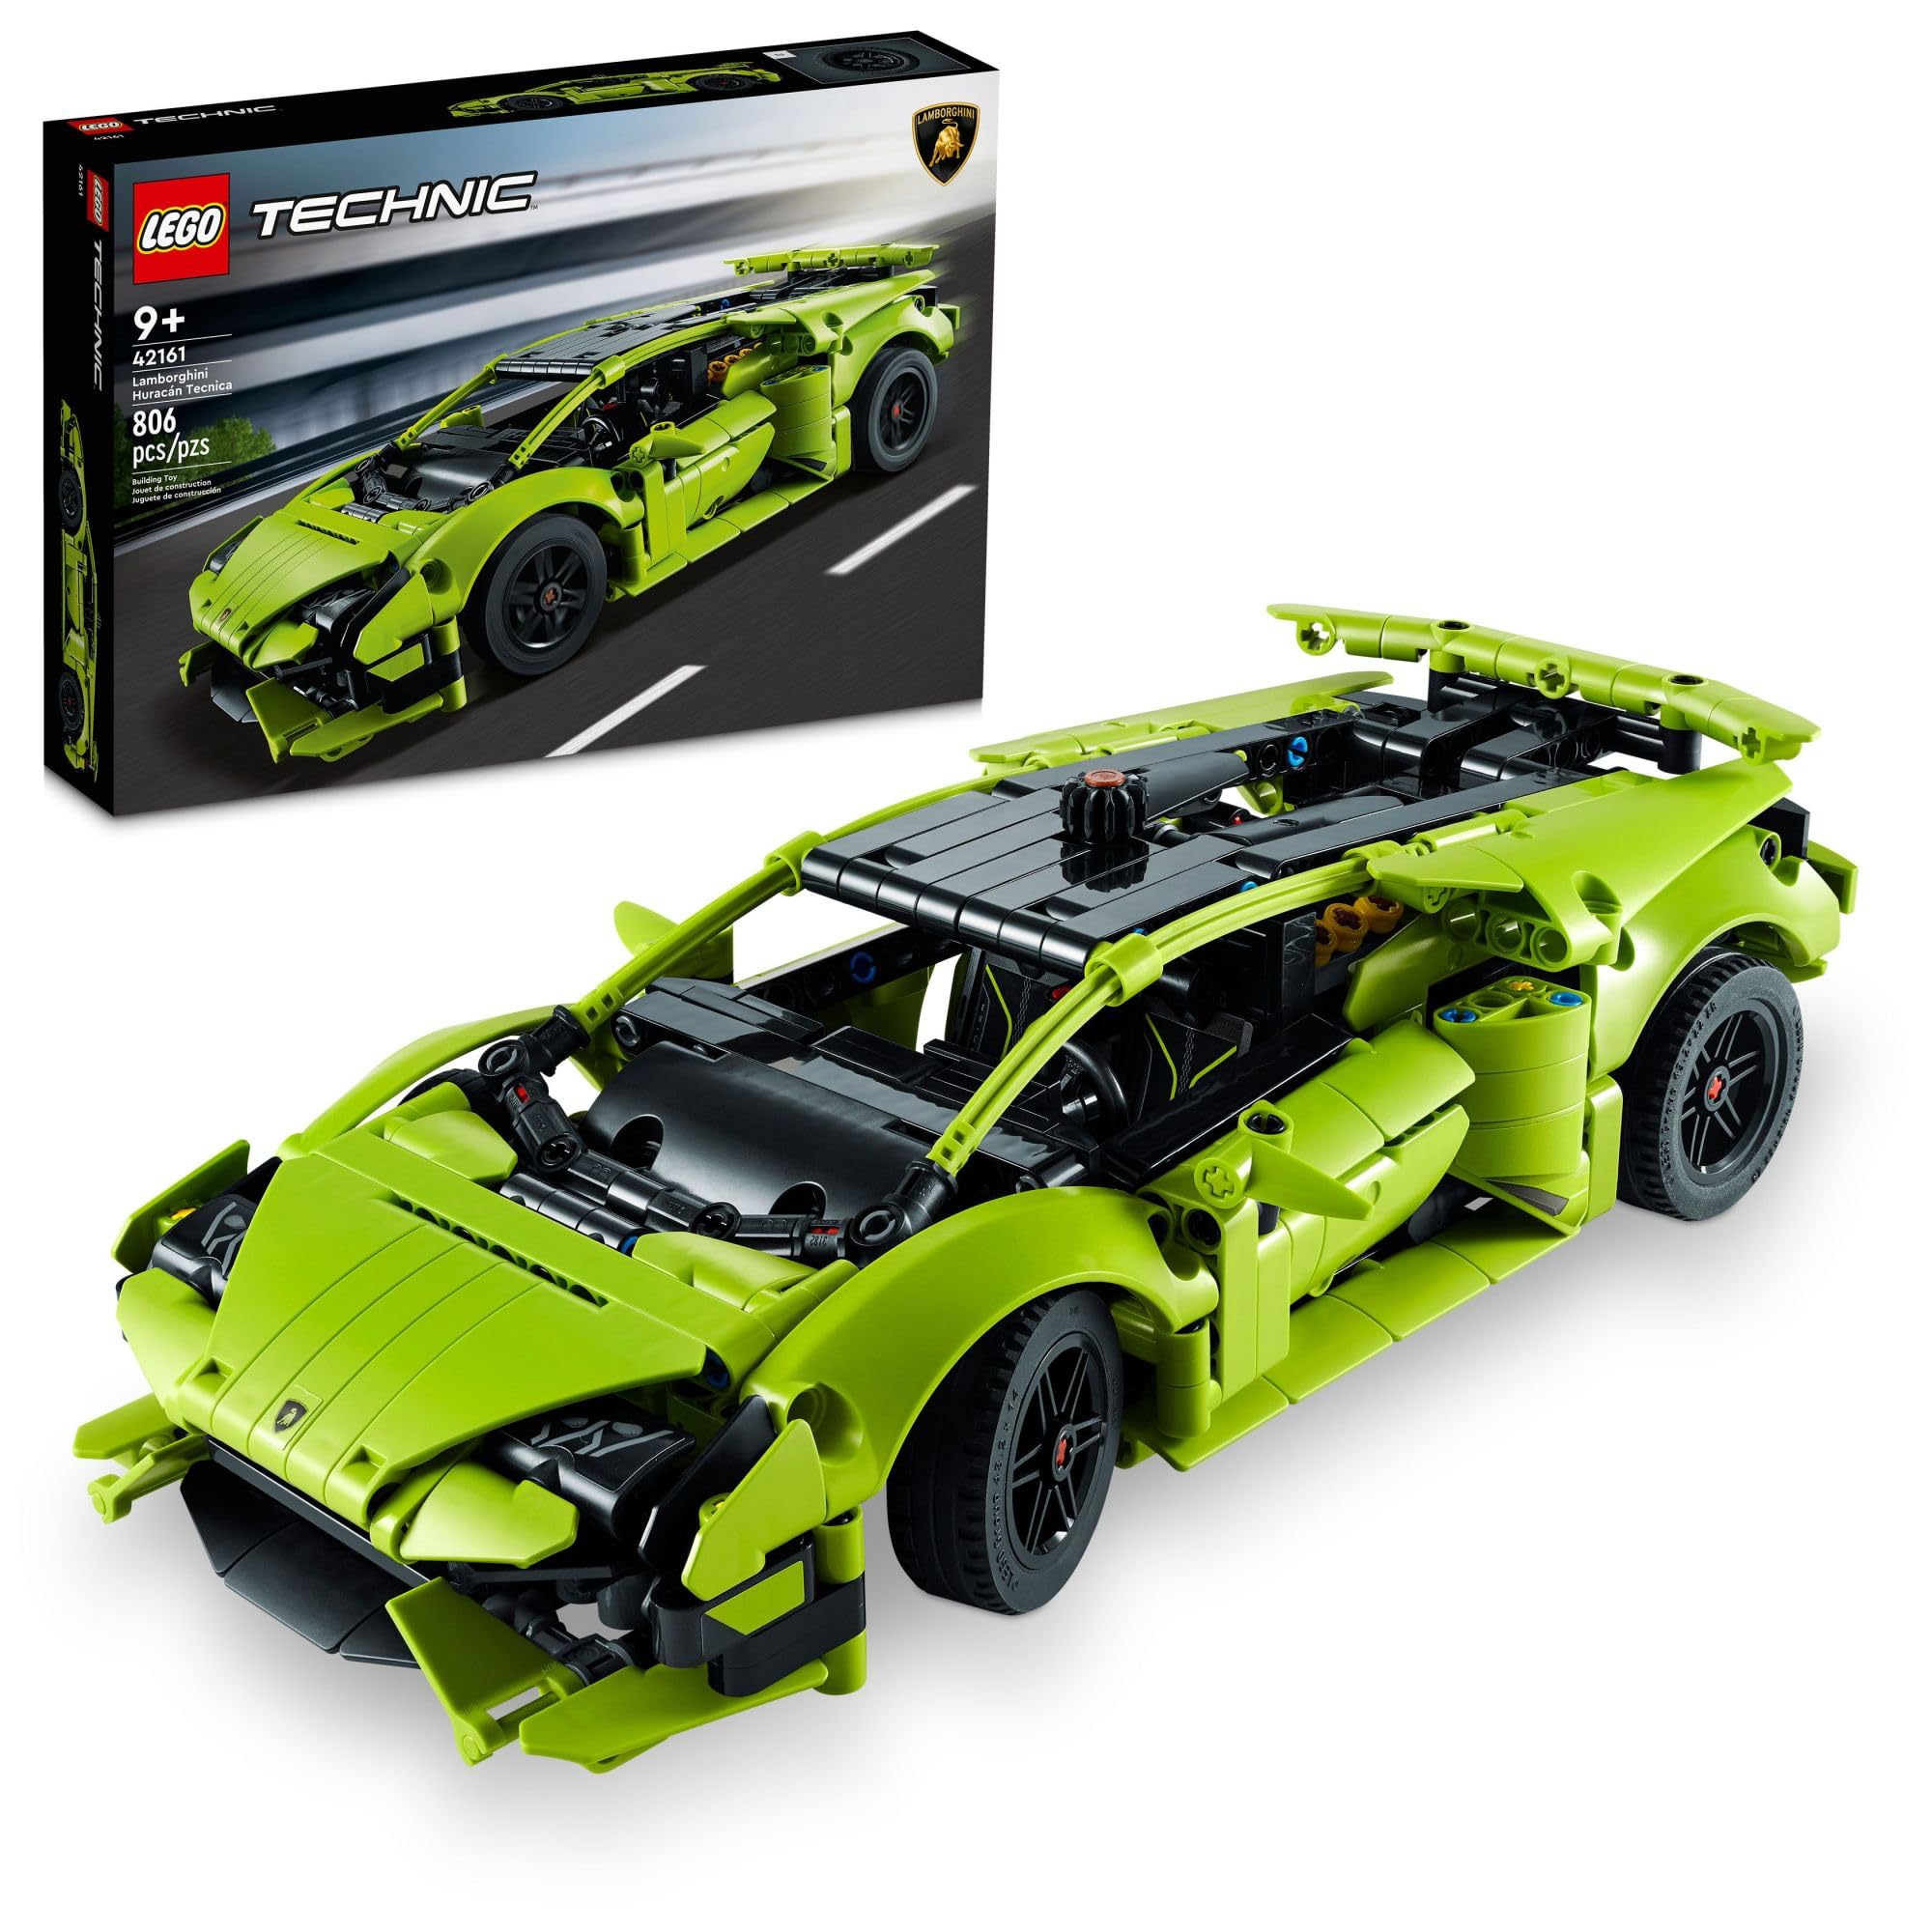 LEGO Technic Lamborghini Huracán Tecnica Advanced Sports Car Building Kit for Kids Ages 9 and up Who Love Engineering and Collecting Exotic Sports Car Toys, 42161, Only $39.99